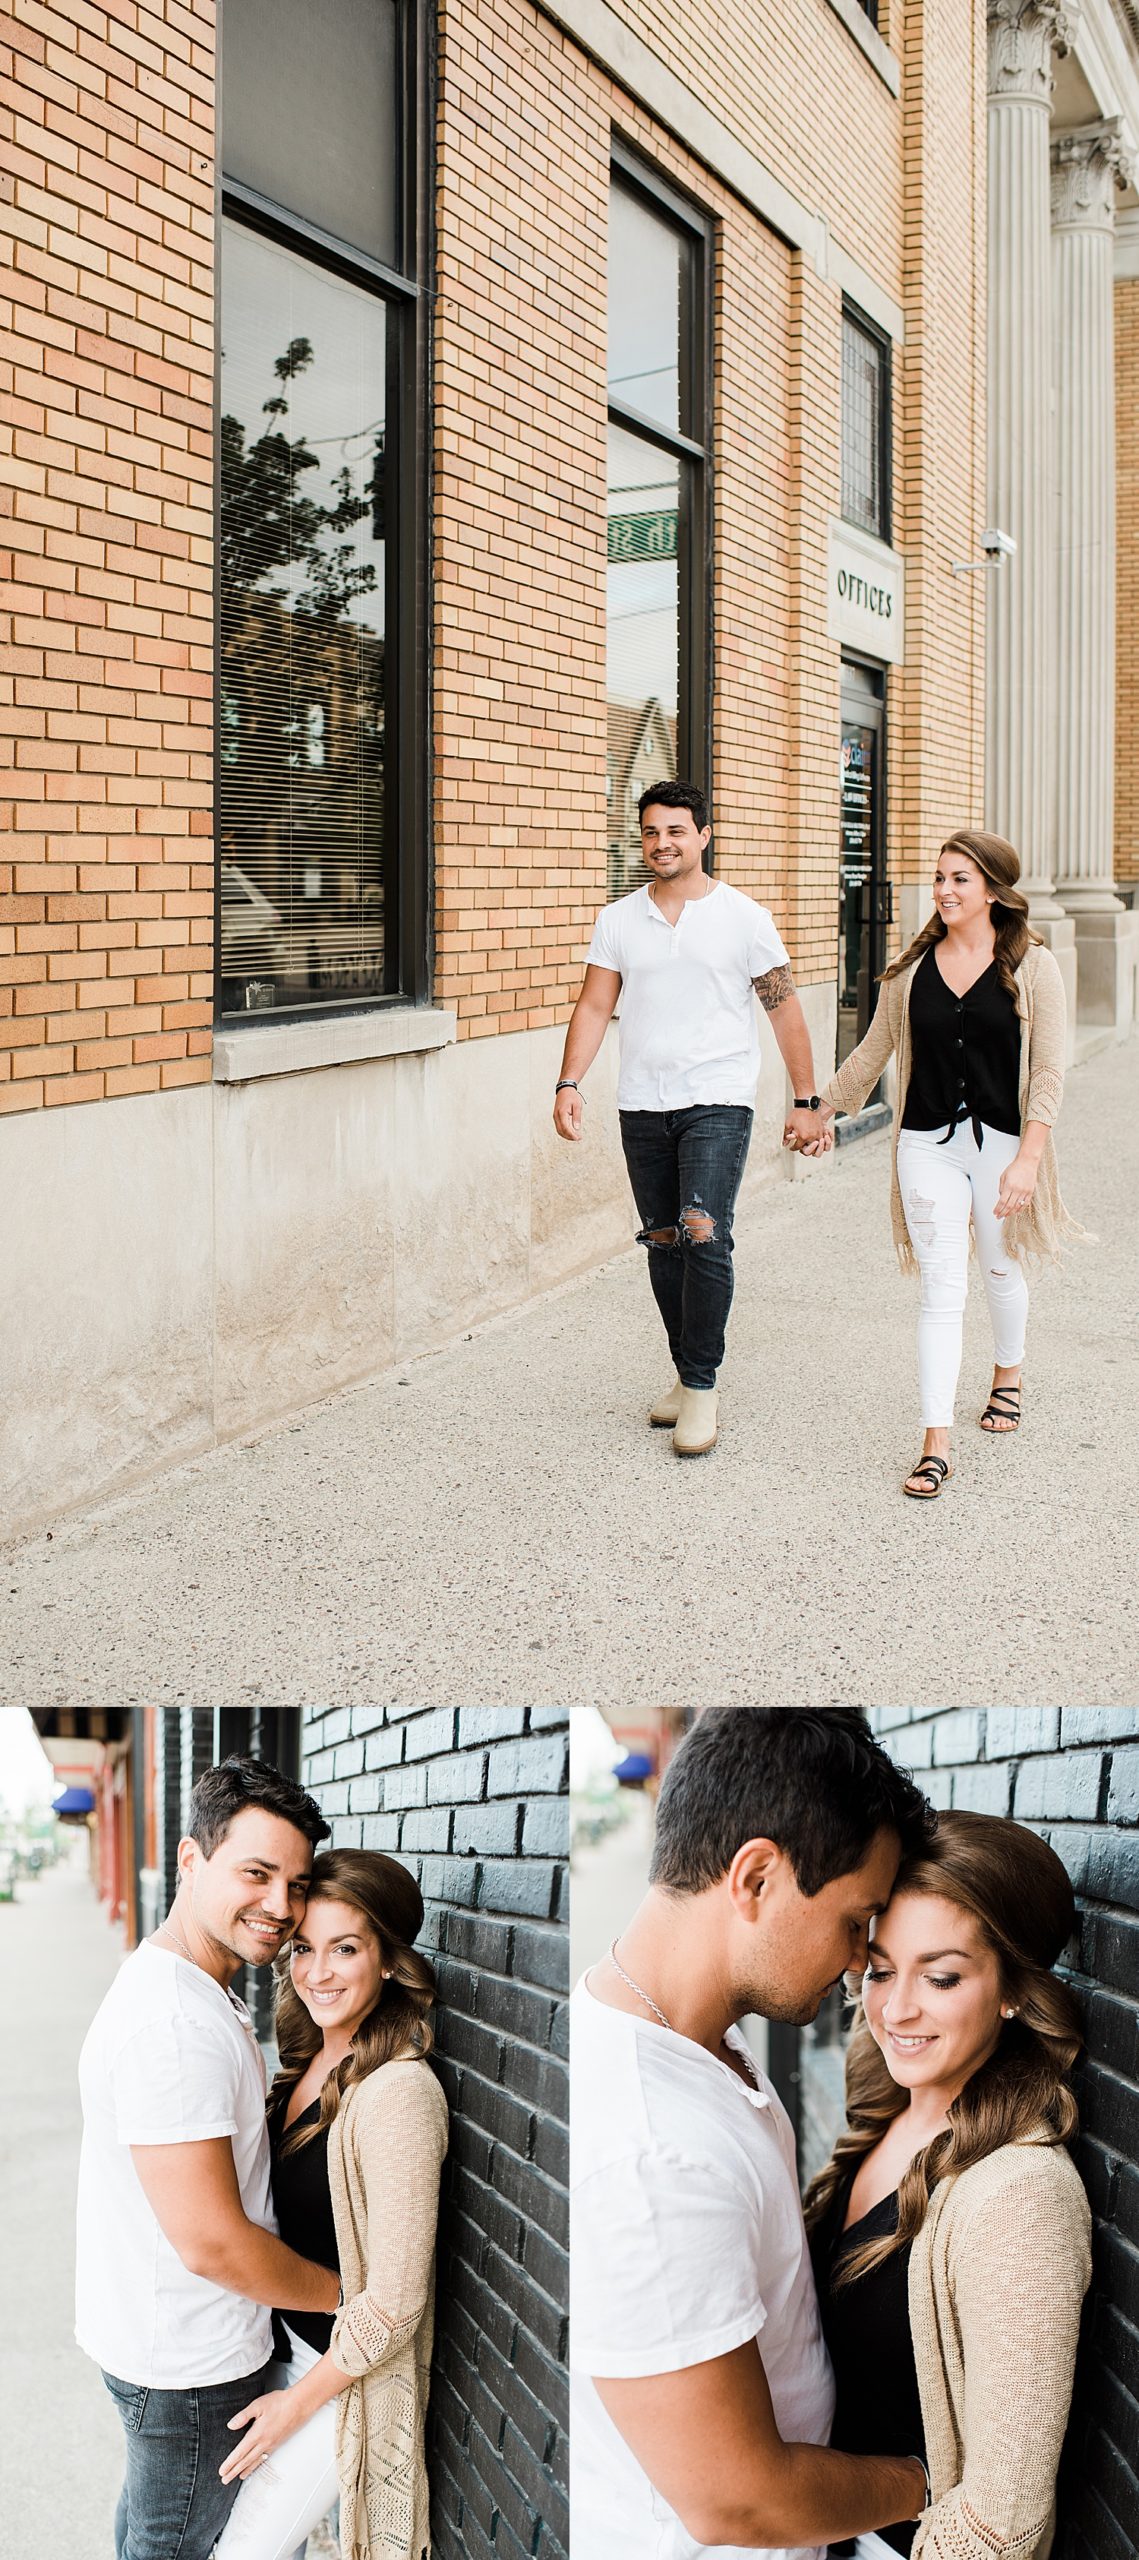 Stony Creek metro park engagement session while woman wears tan cardigan and white jeans